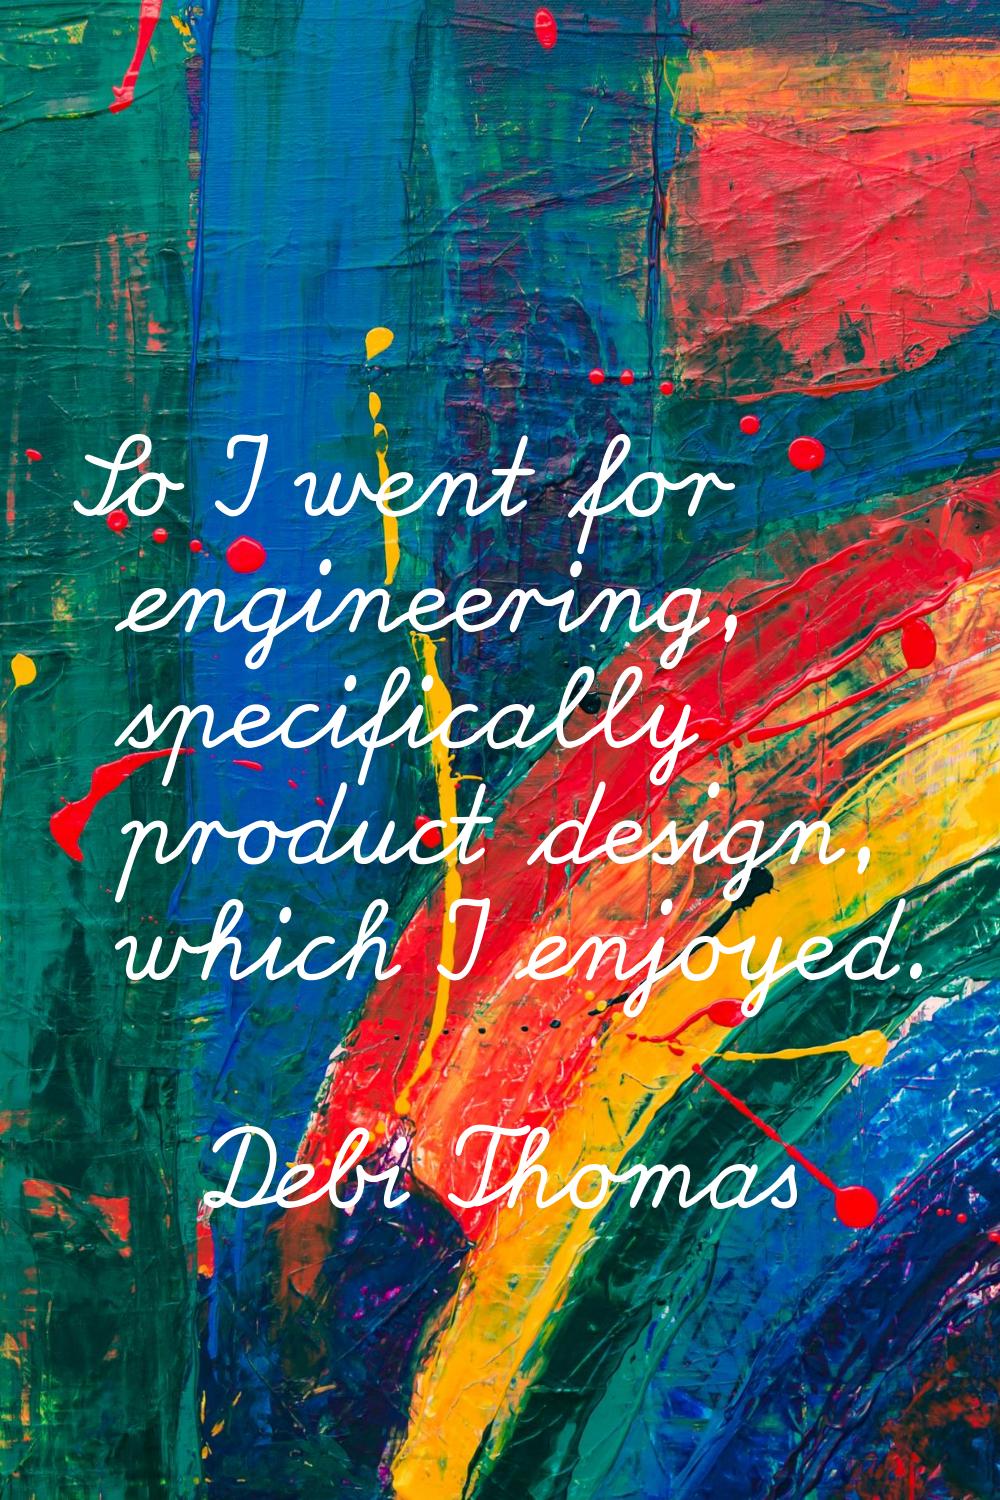 So I went for engineering, specifically product design, which I enjoyed.